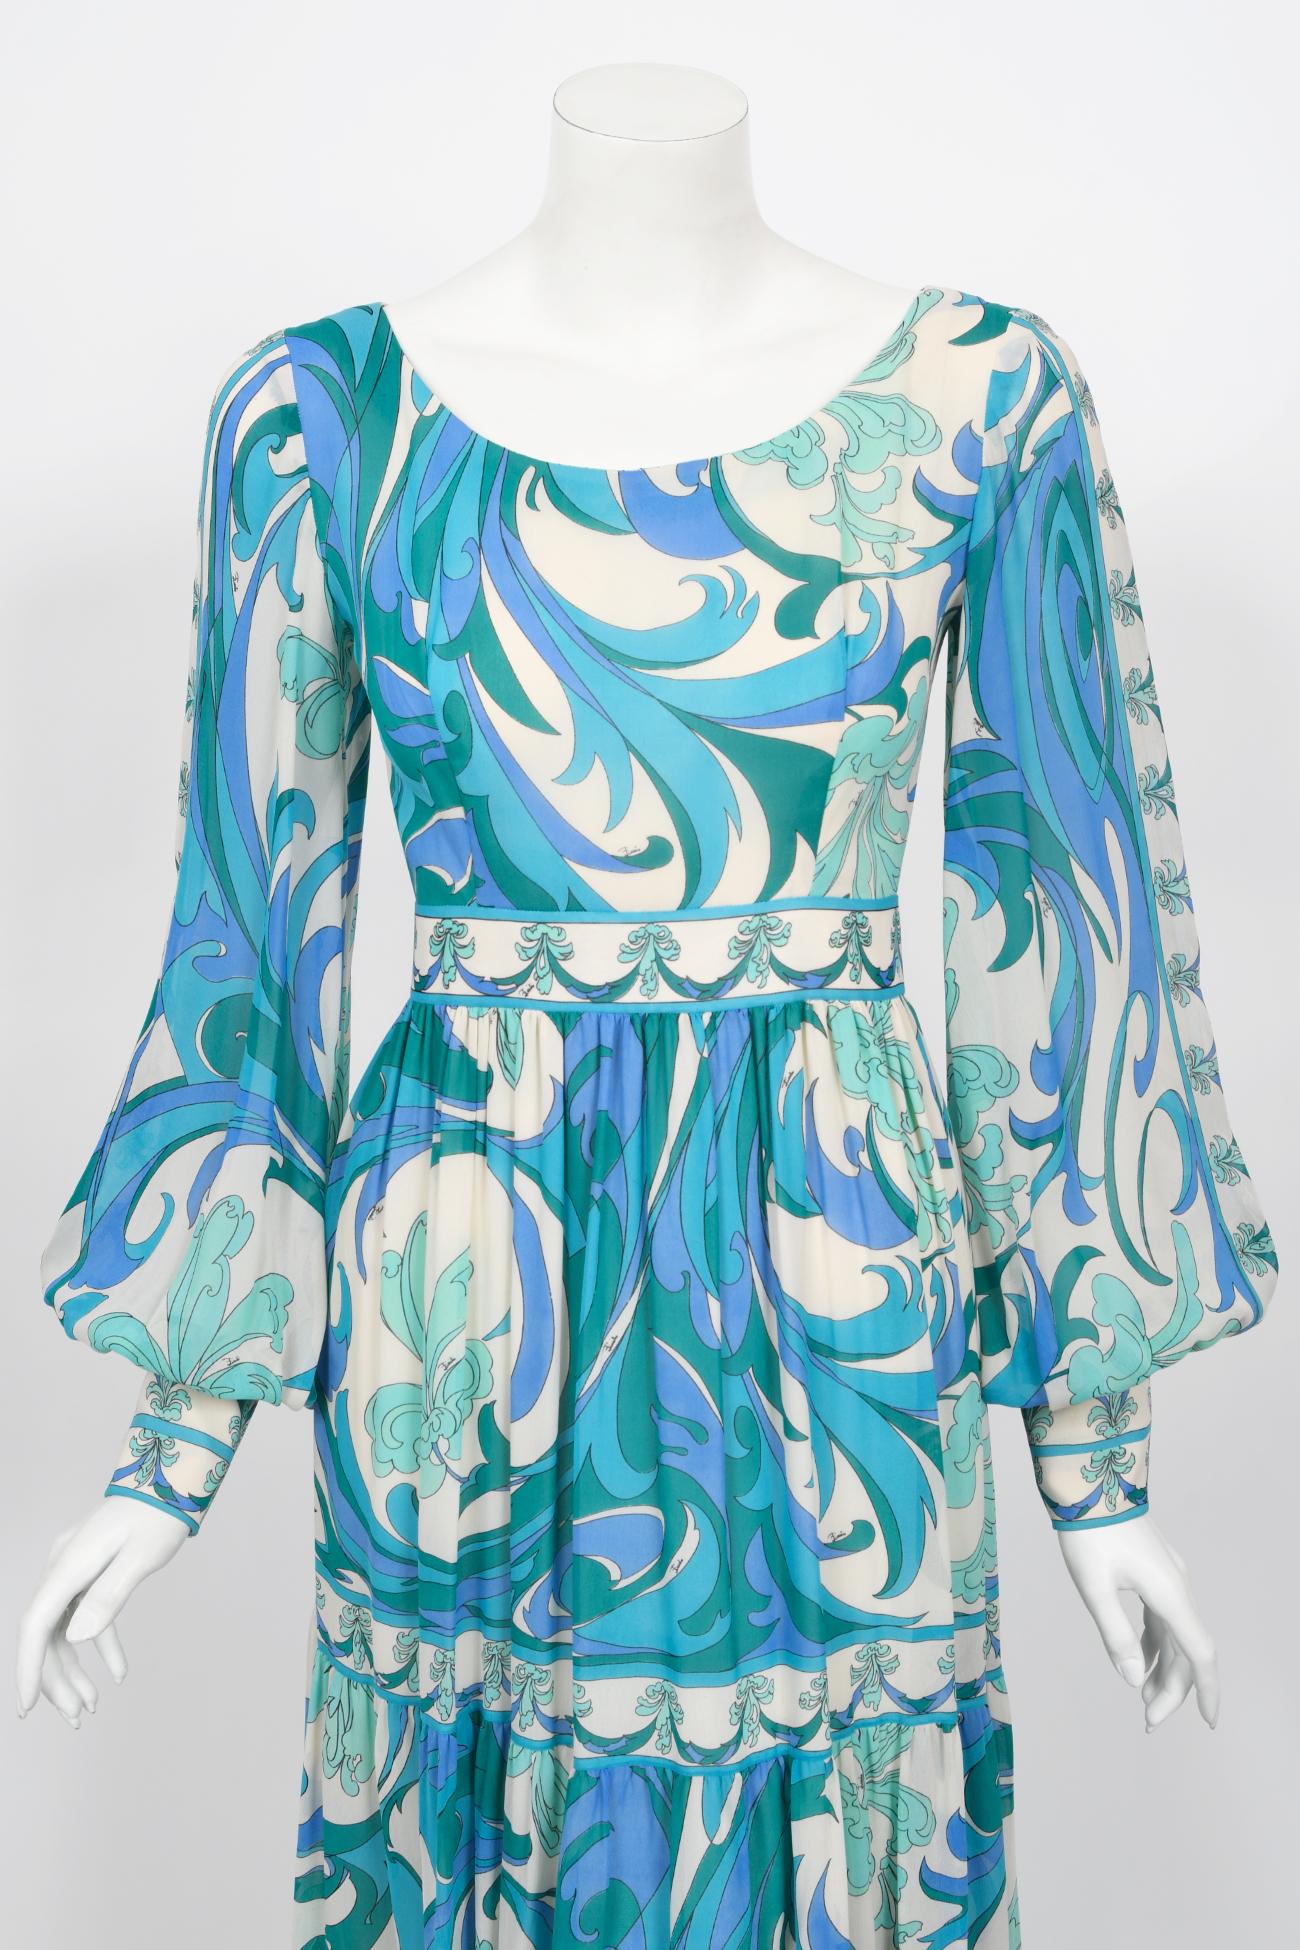 An absolutely gorgeous and totally timeless Emilio Pucci couture psychedelic leaf motif print silk maxi dress dating back to the early 1970's. Emilio Pucci was the king of textile innovative and beautiful prints during this period. His designs